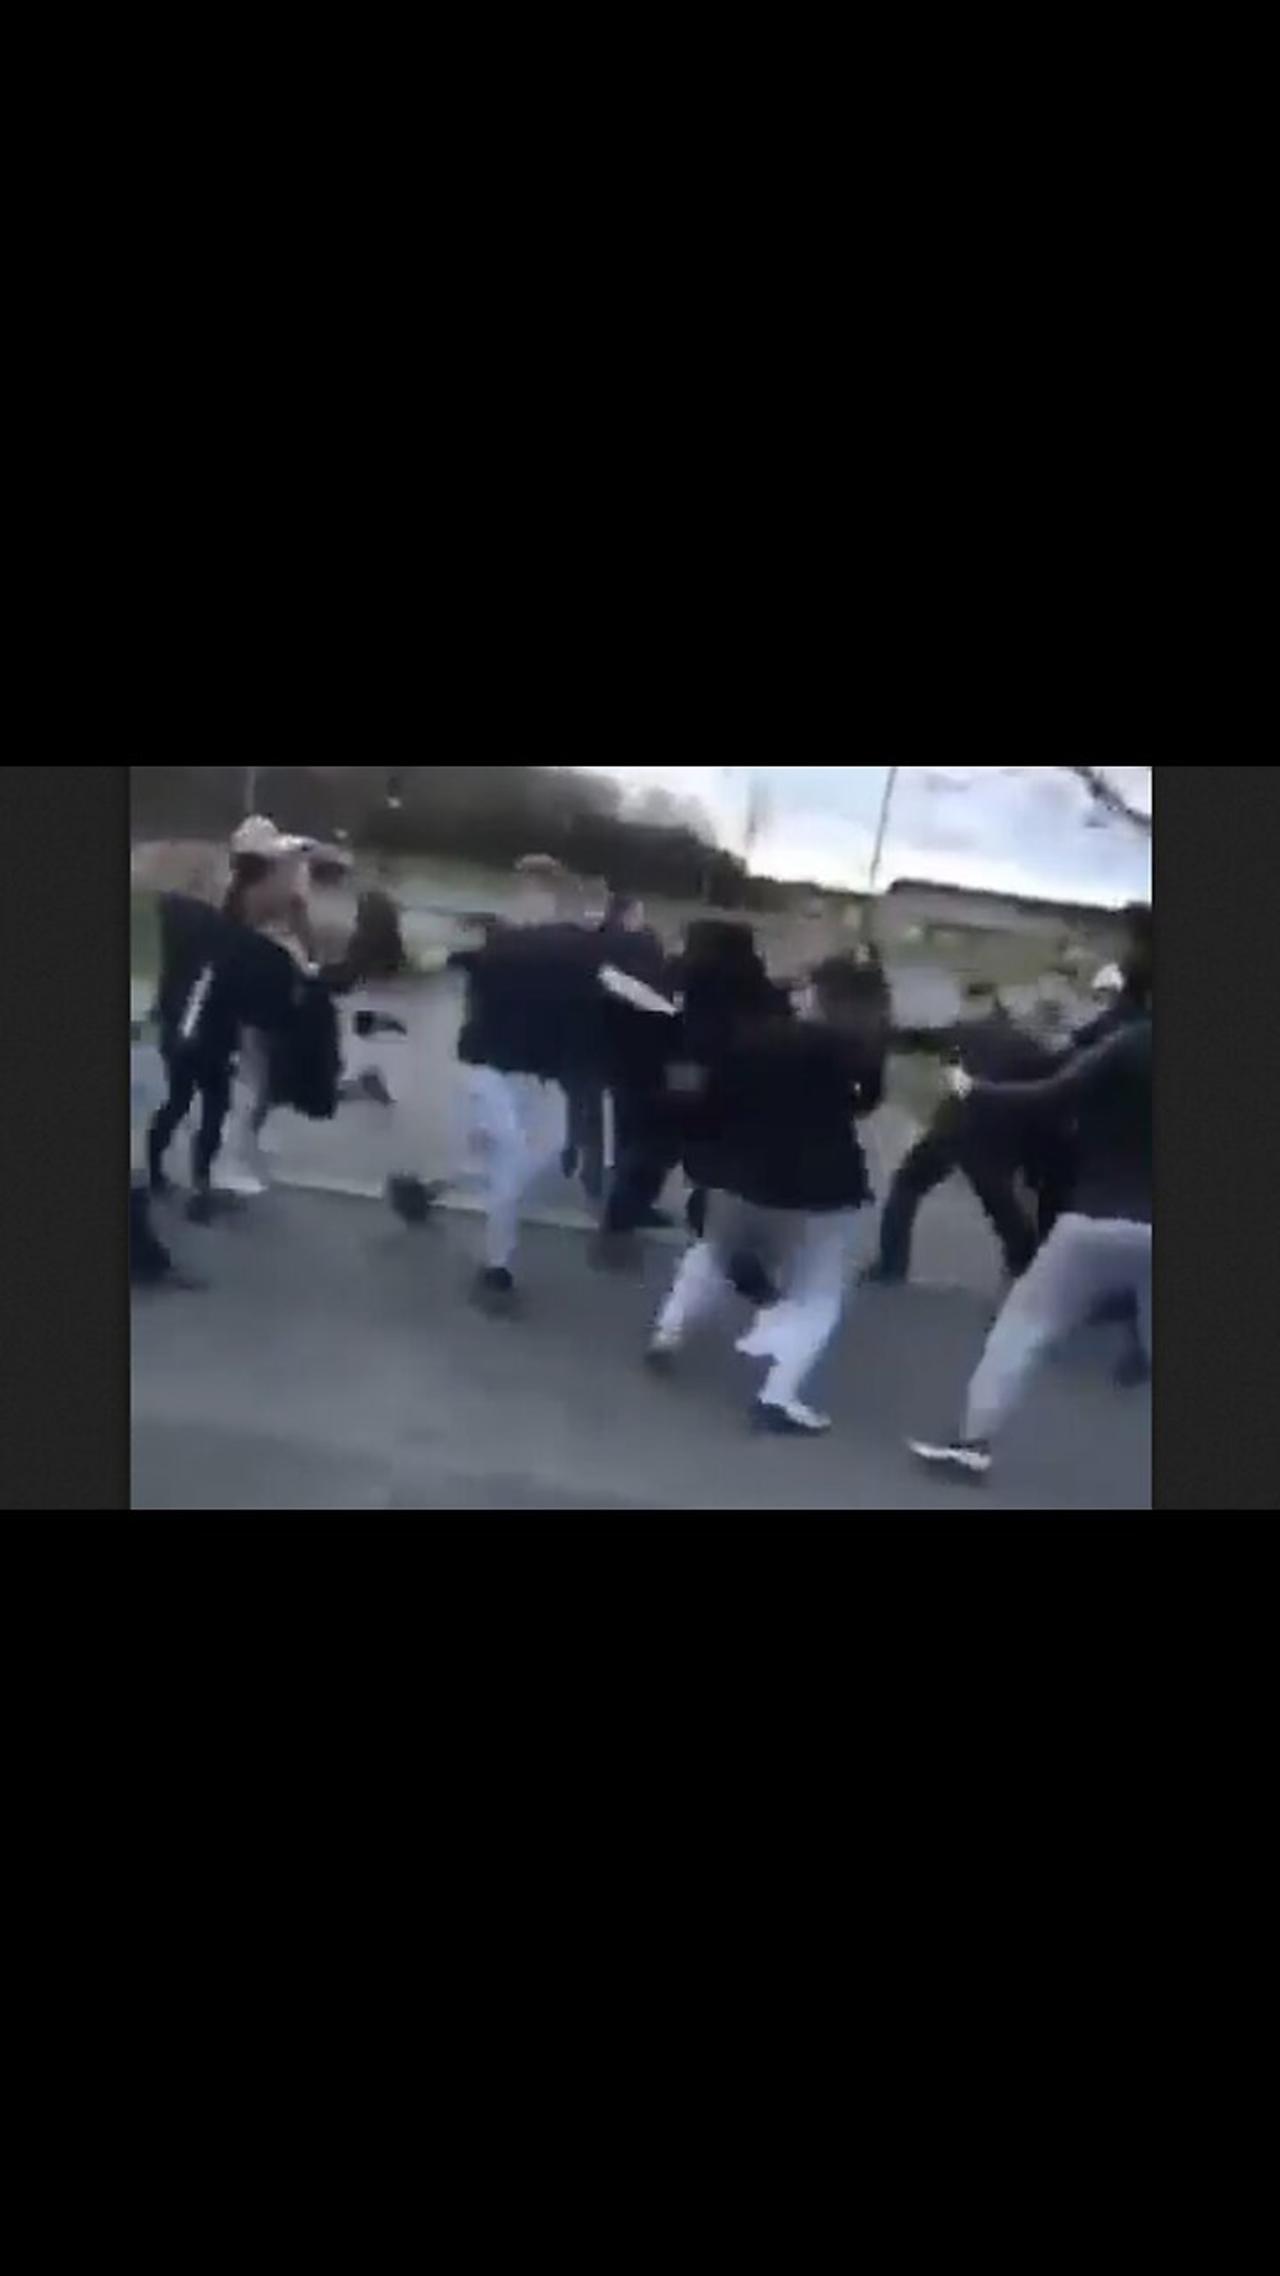 Pack of invaders attack Irishmen in a park & a brawl ensues